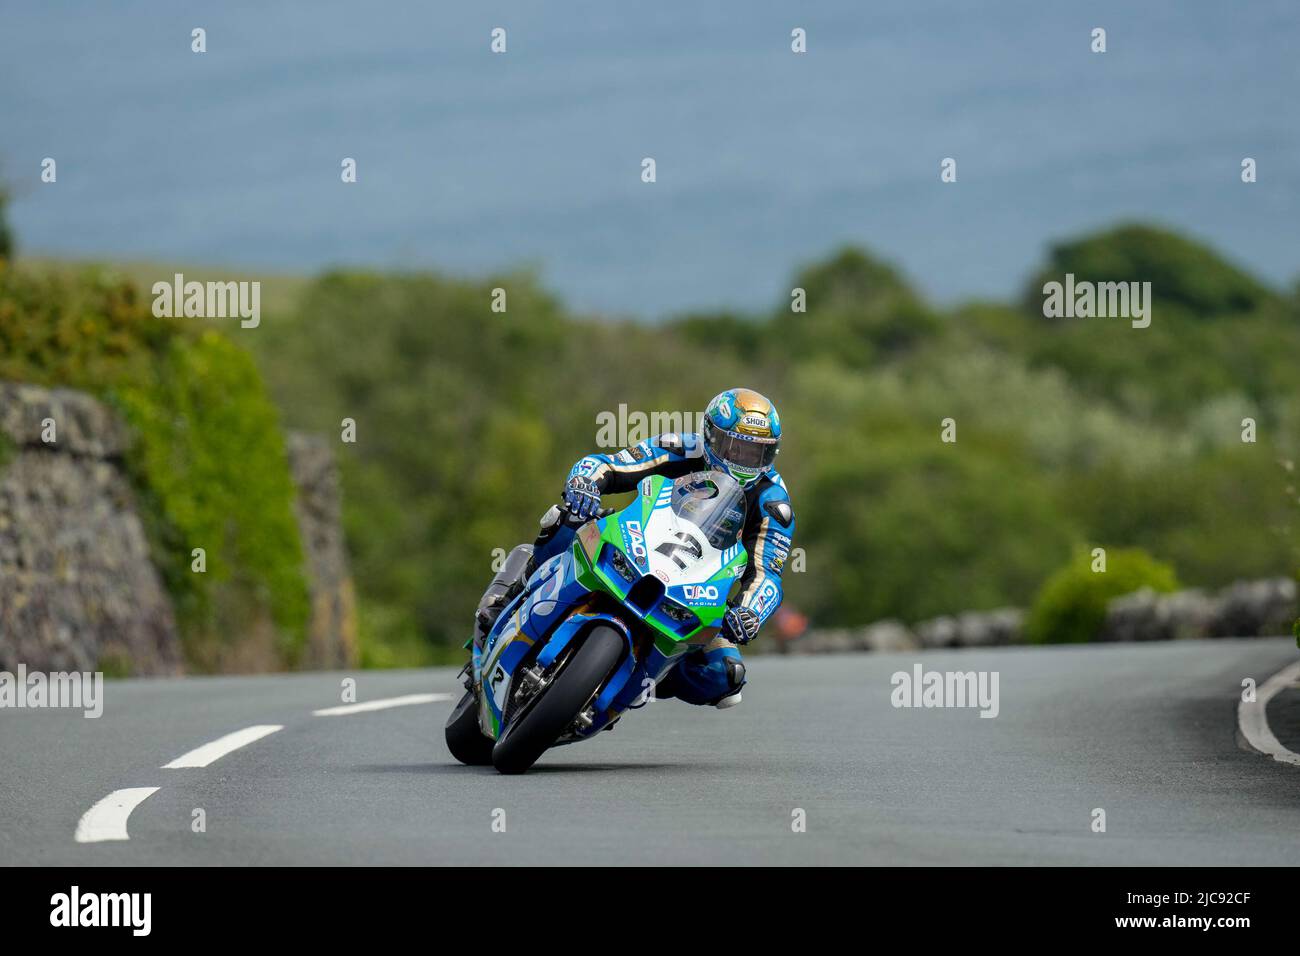 Douglas, Isle Of Man. 11th June, 2022. Dean Harrison (1000 Kawasaki) representing the DAO Racing Kawasaki team on his way to finishing second in the 2022 Milwaukee Senior TT at the Isle of Man, Douglas, Isle of Man on the 11 June 2022. Photo by David Horn. Credit: PRiME Media Images/Alamy Live News Stock Photo